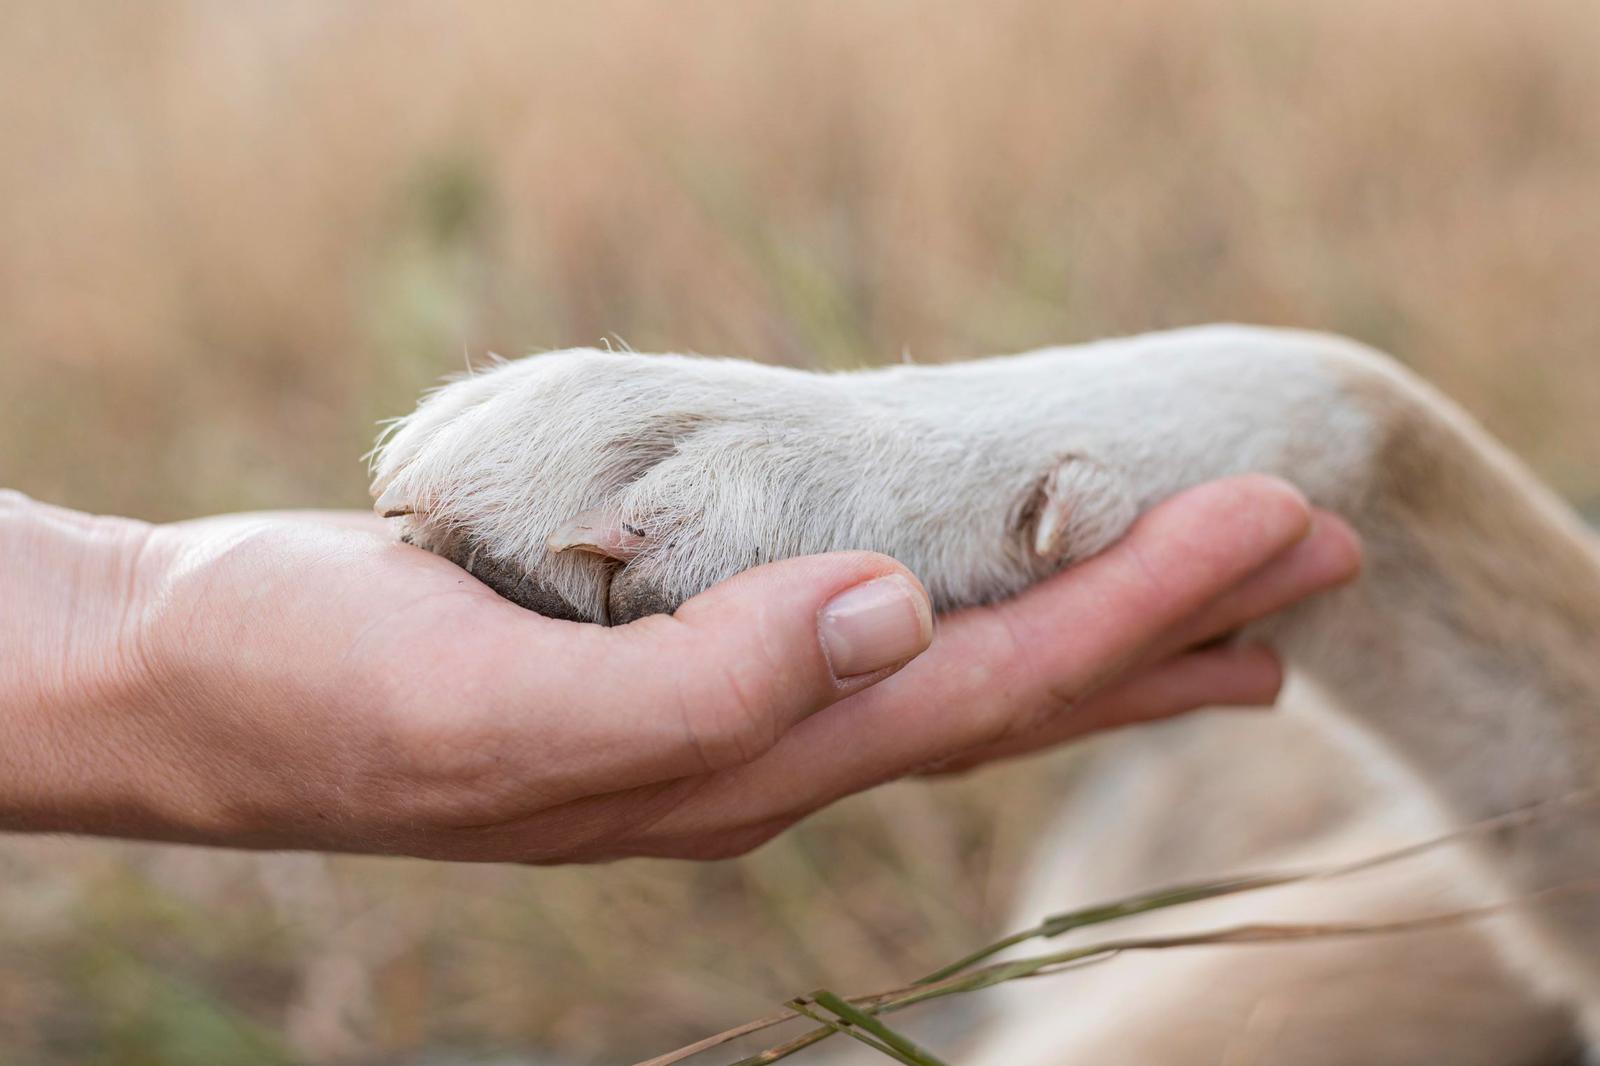 side-view-of-person-holding-dog-s-paw2.jpg